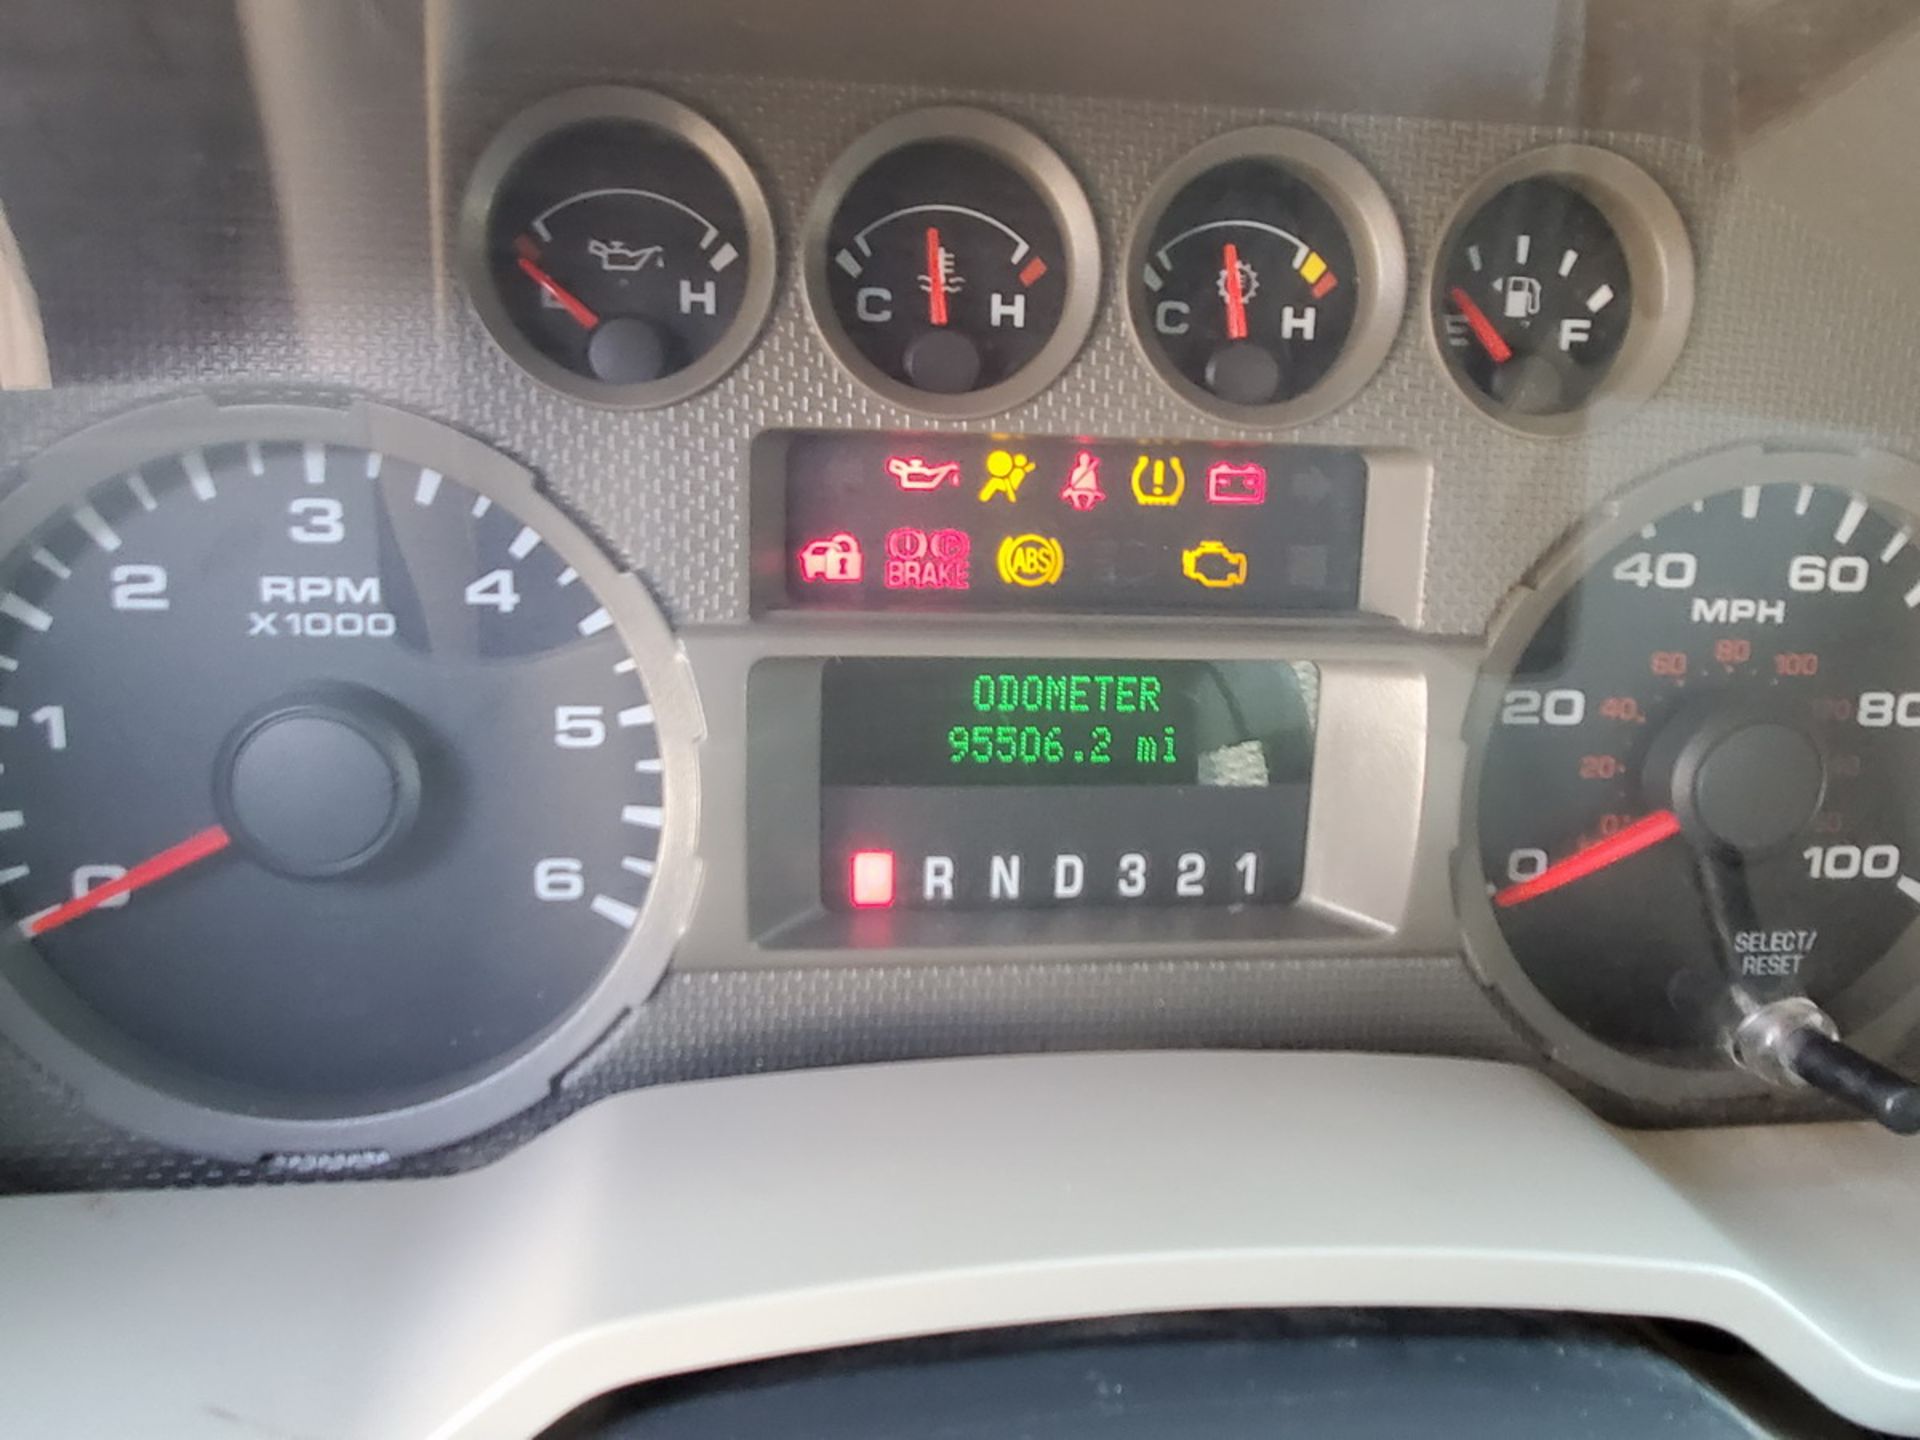 2008 Ford F-250 Pickup V8 Engine, Vin: 1FTN20518ED94781, 95,506 Mileage, Plate: TX GTP-8796 - Image 11 of 16